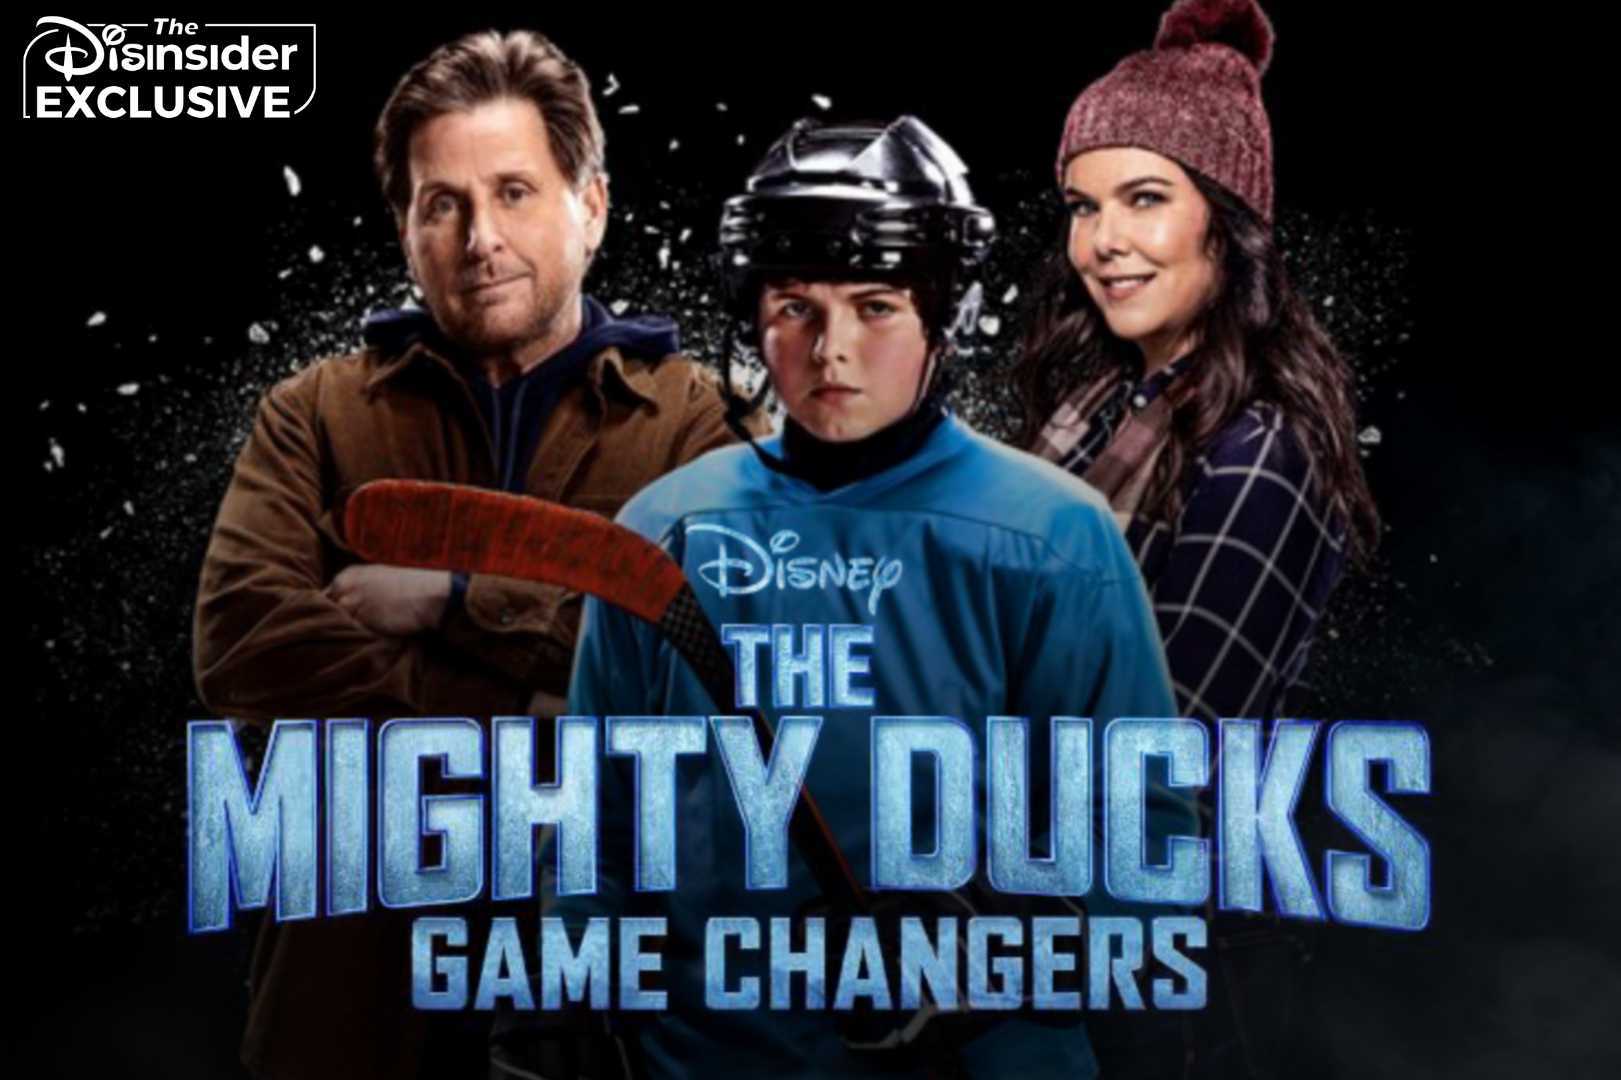 The Anaheim [Mighty] Ducks just revealed their new 30th